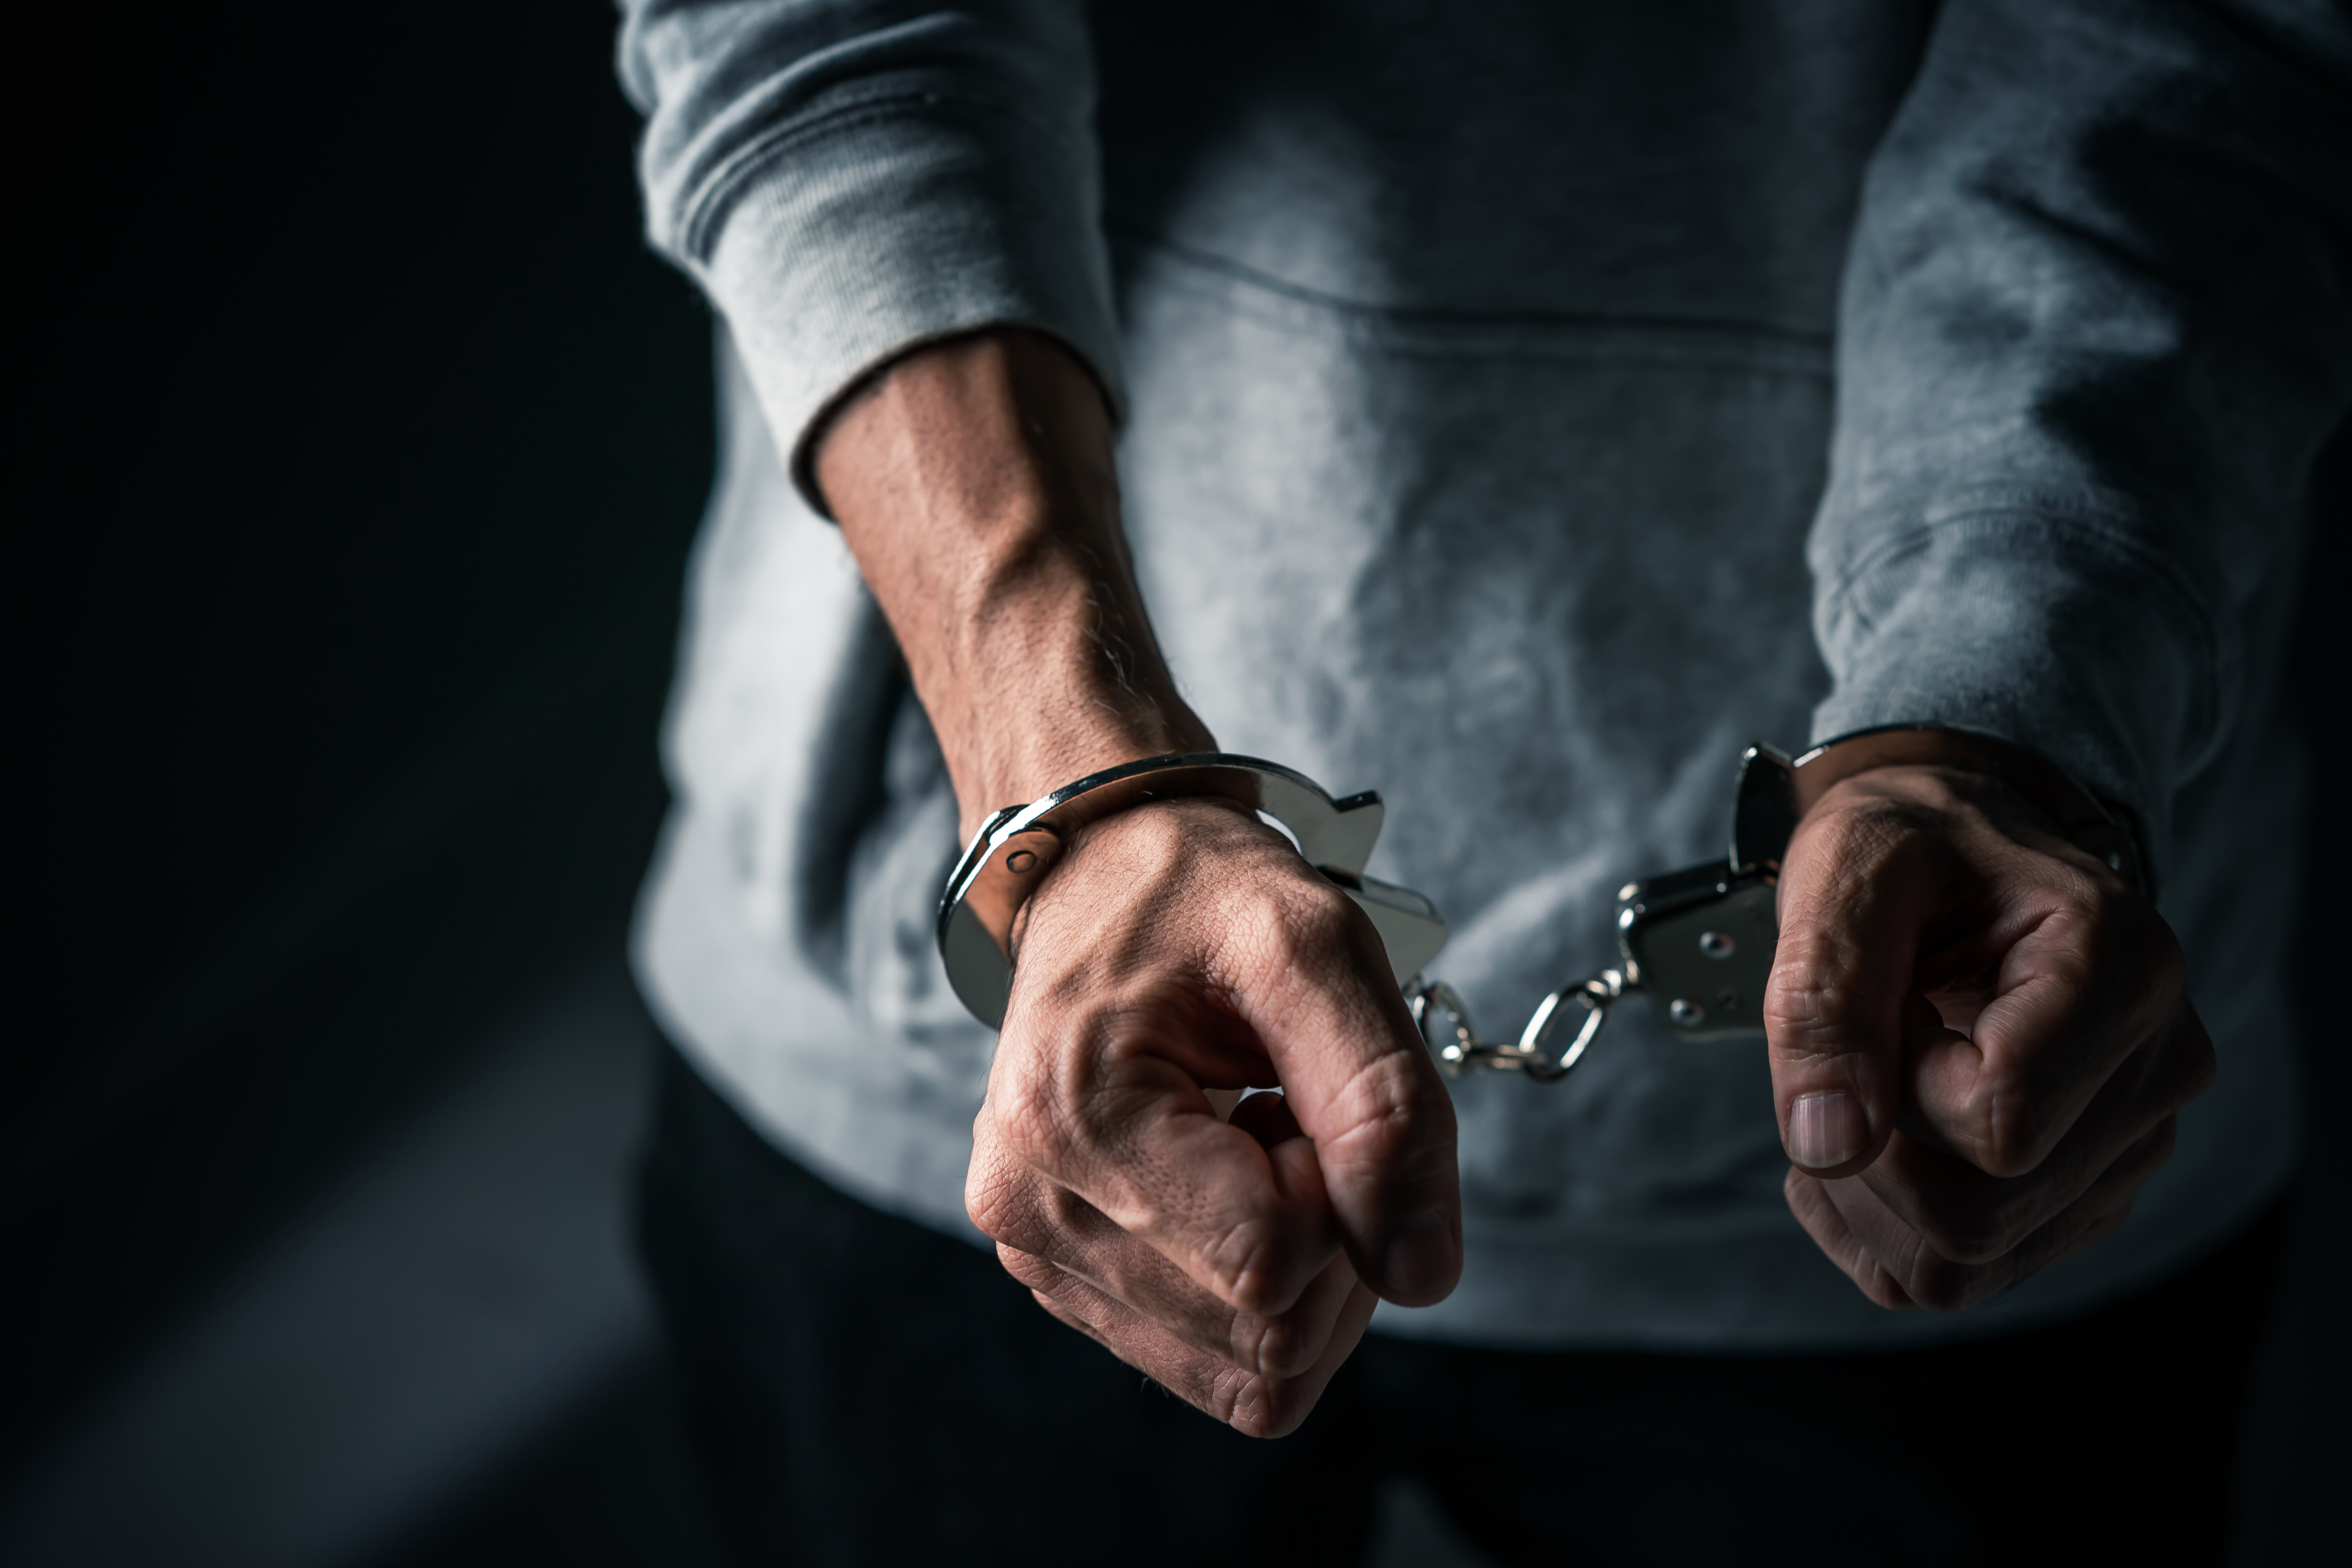 An image showing a man in handcuffs.